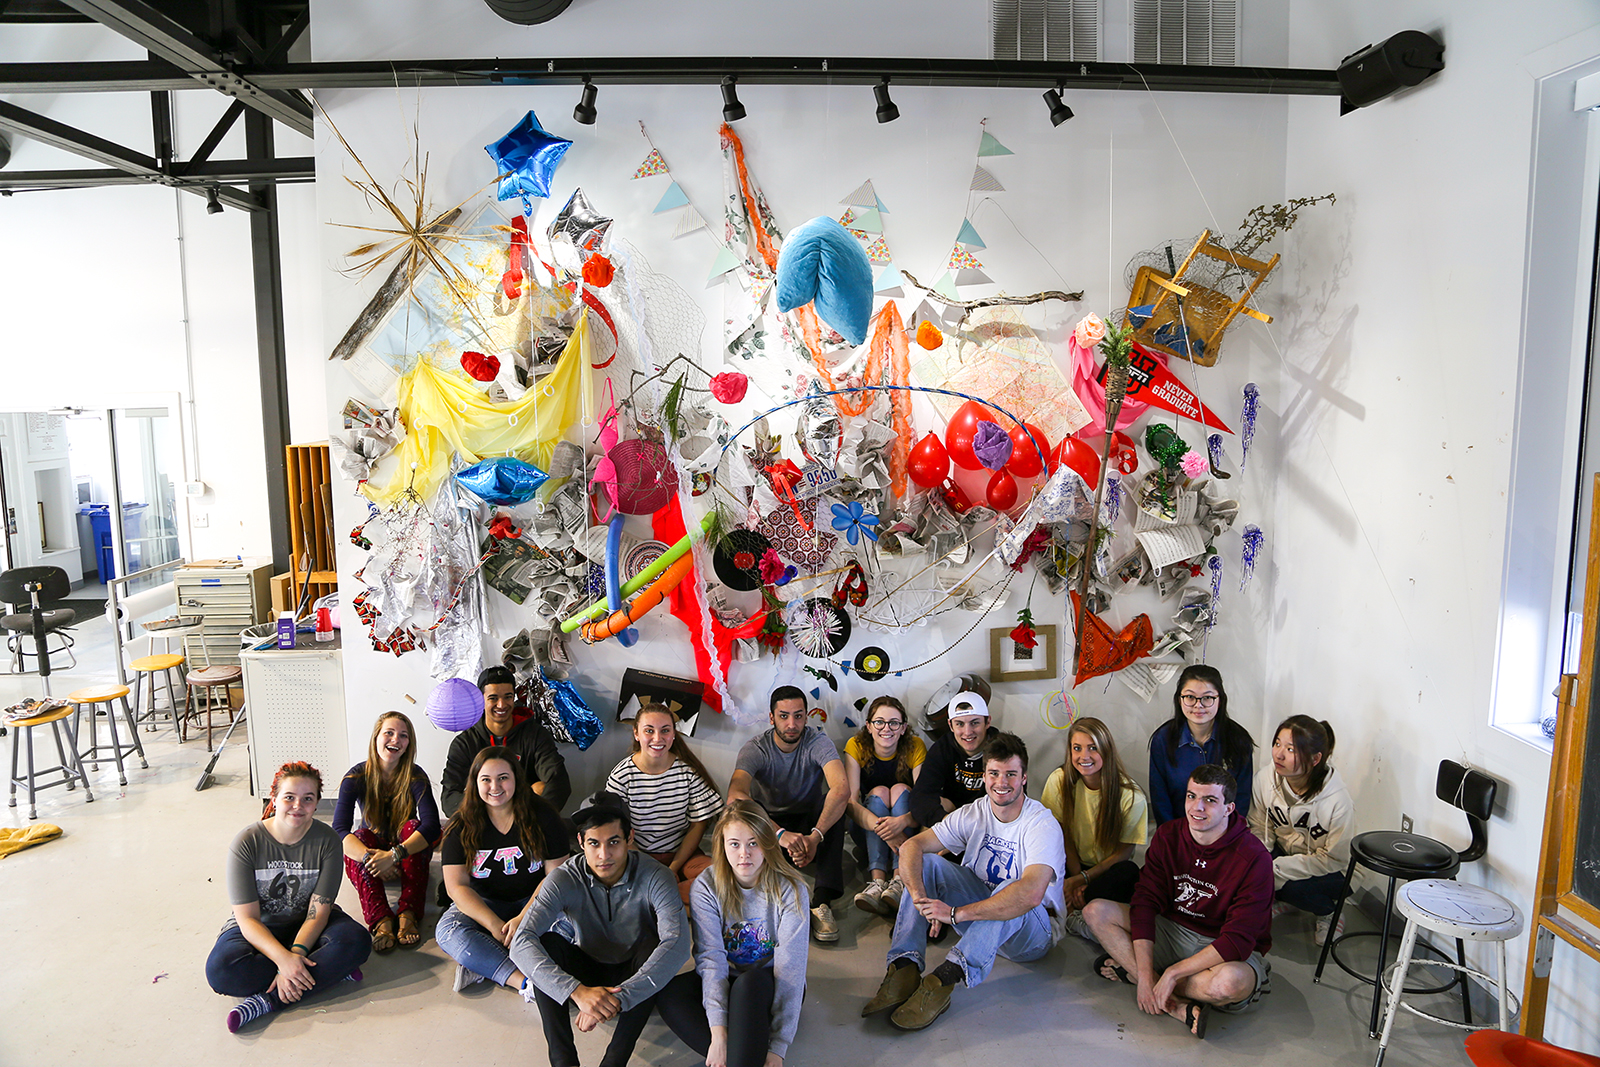 Intermedia_S (sculpture) students with a large-scale collaborative wall installation